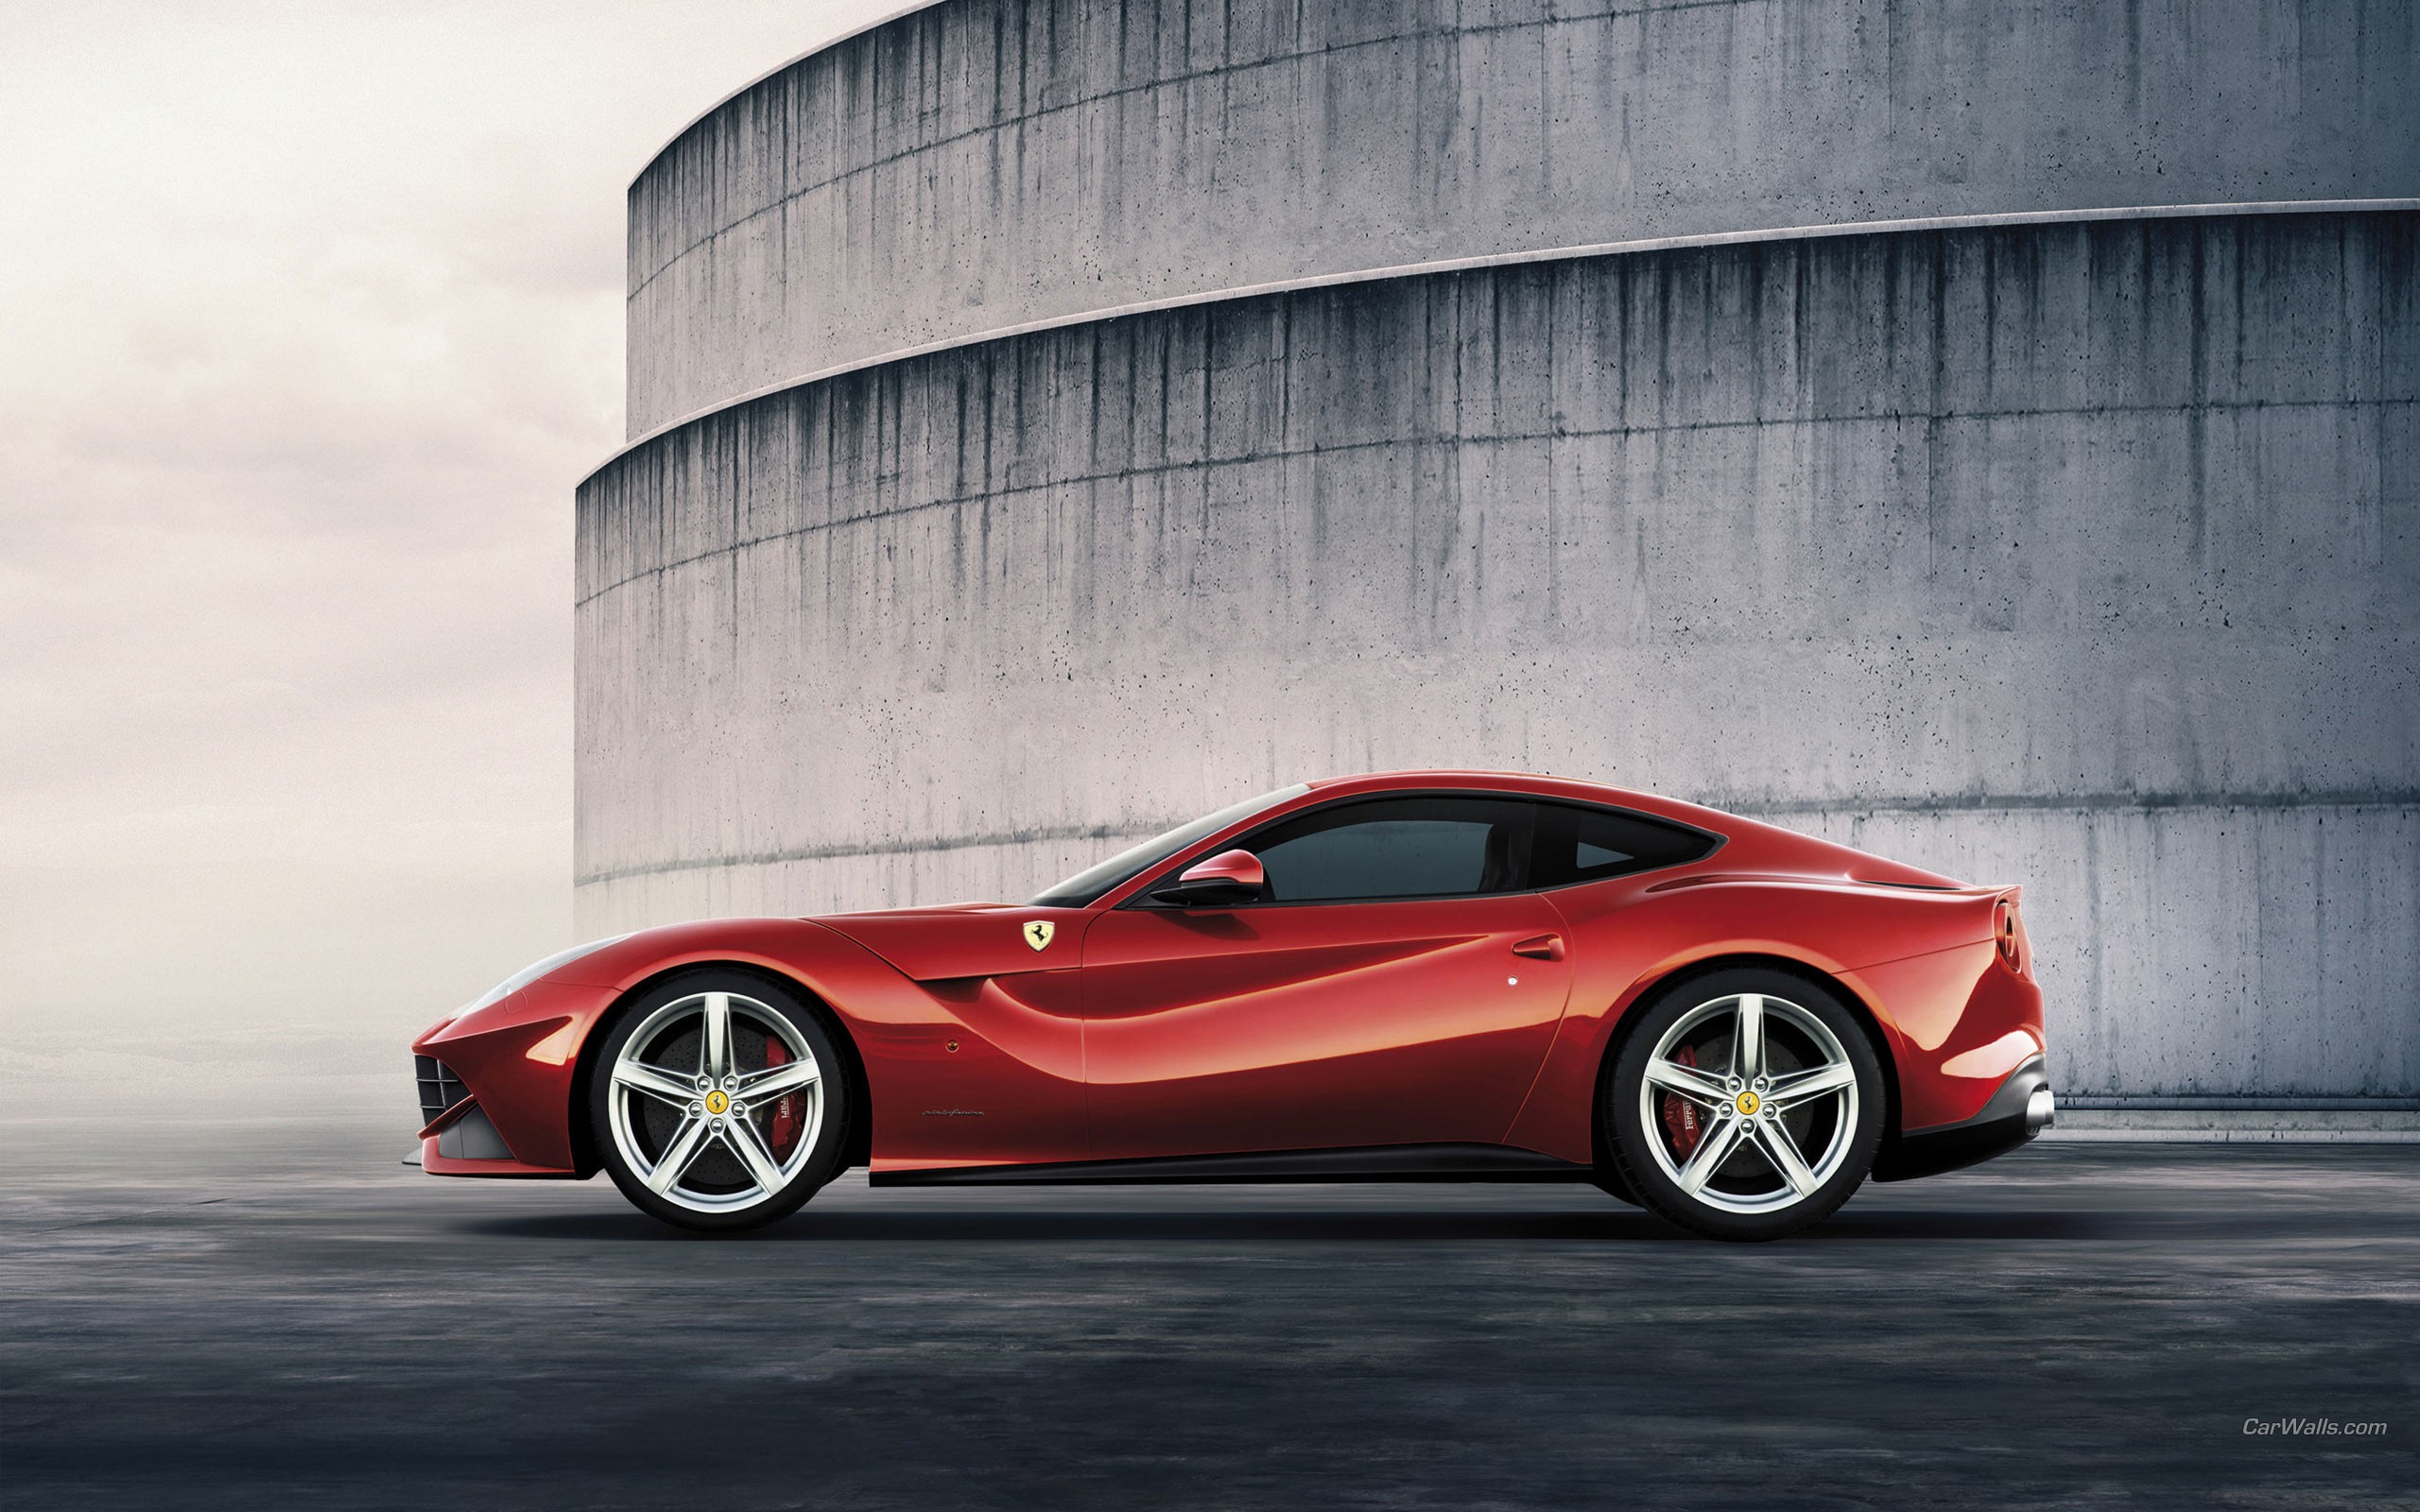 cars, Ferrari, Supercars, Red, Cars, Coupe, Sports, Cars Wallpaper